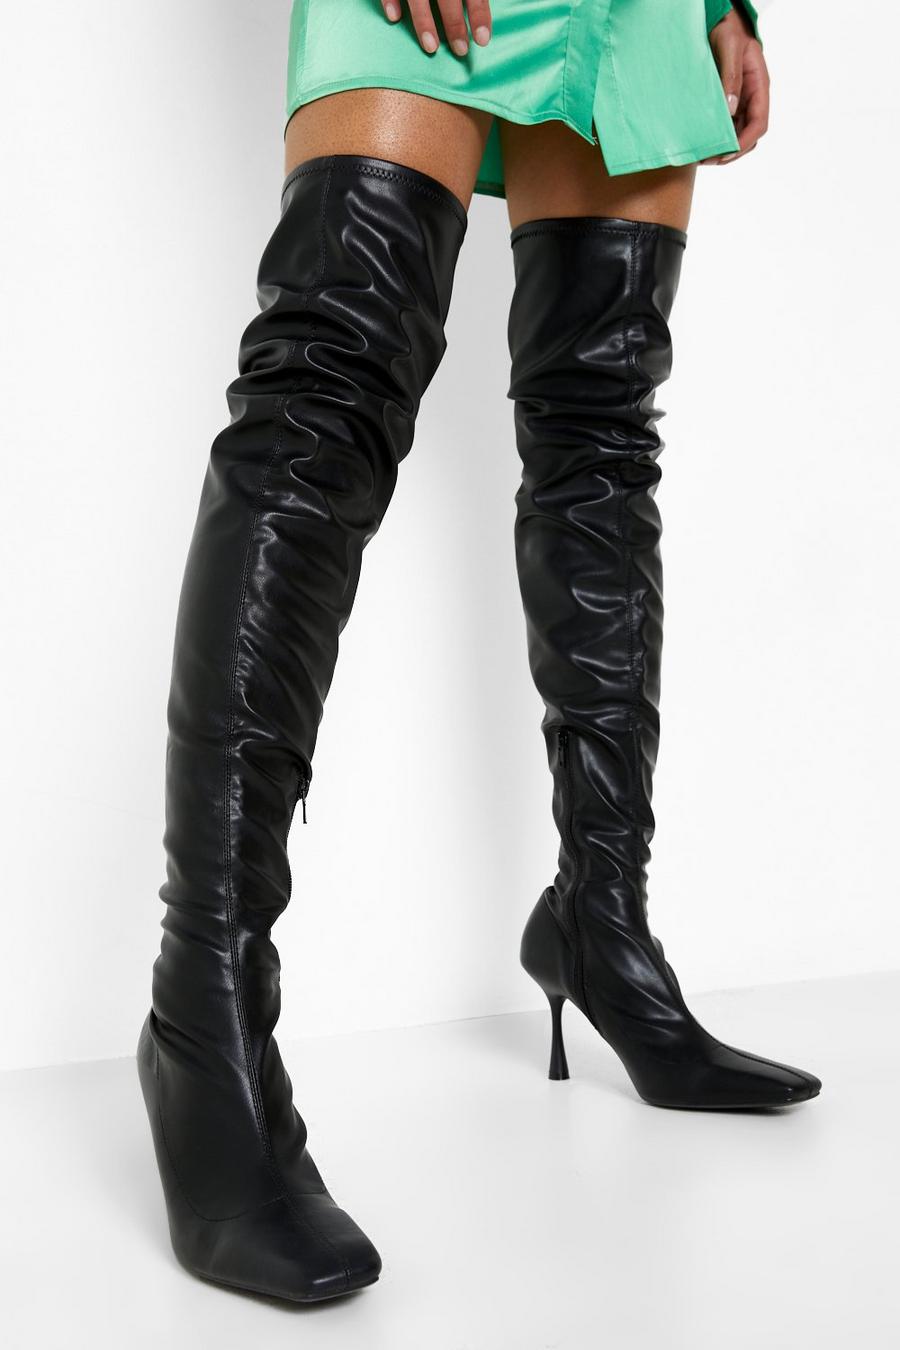 Black noir Over The Knee Boots Pointed Stiletto Boots